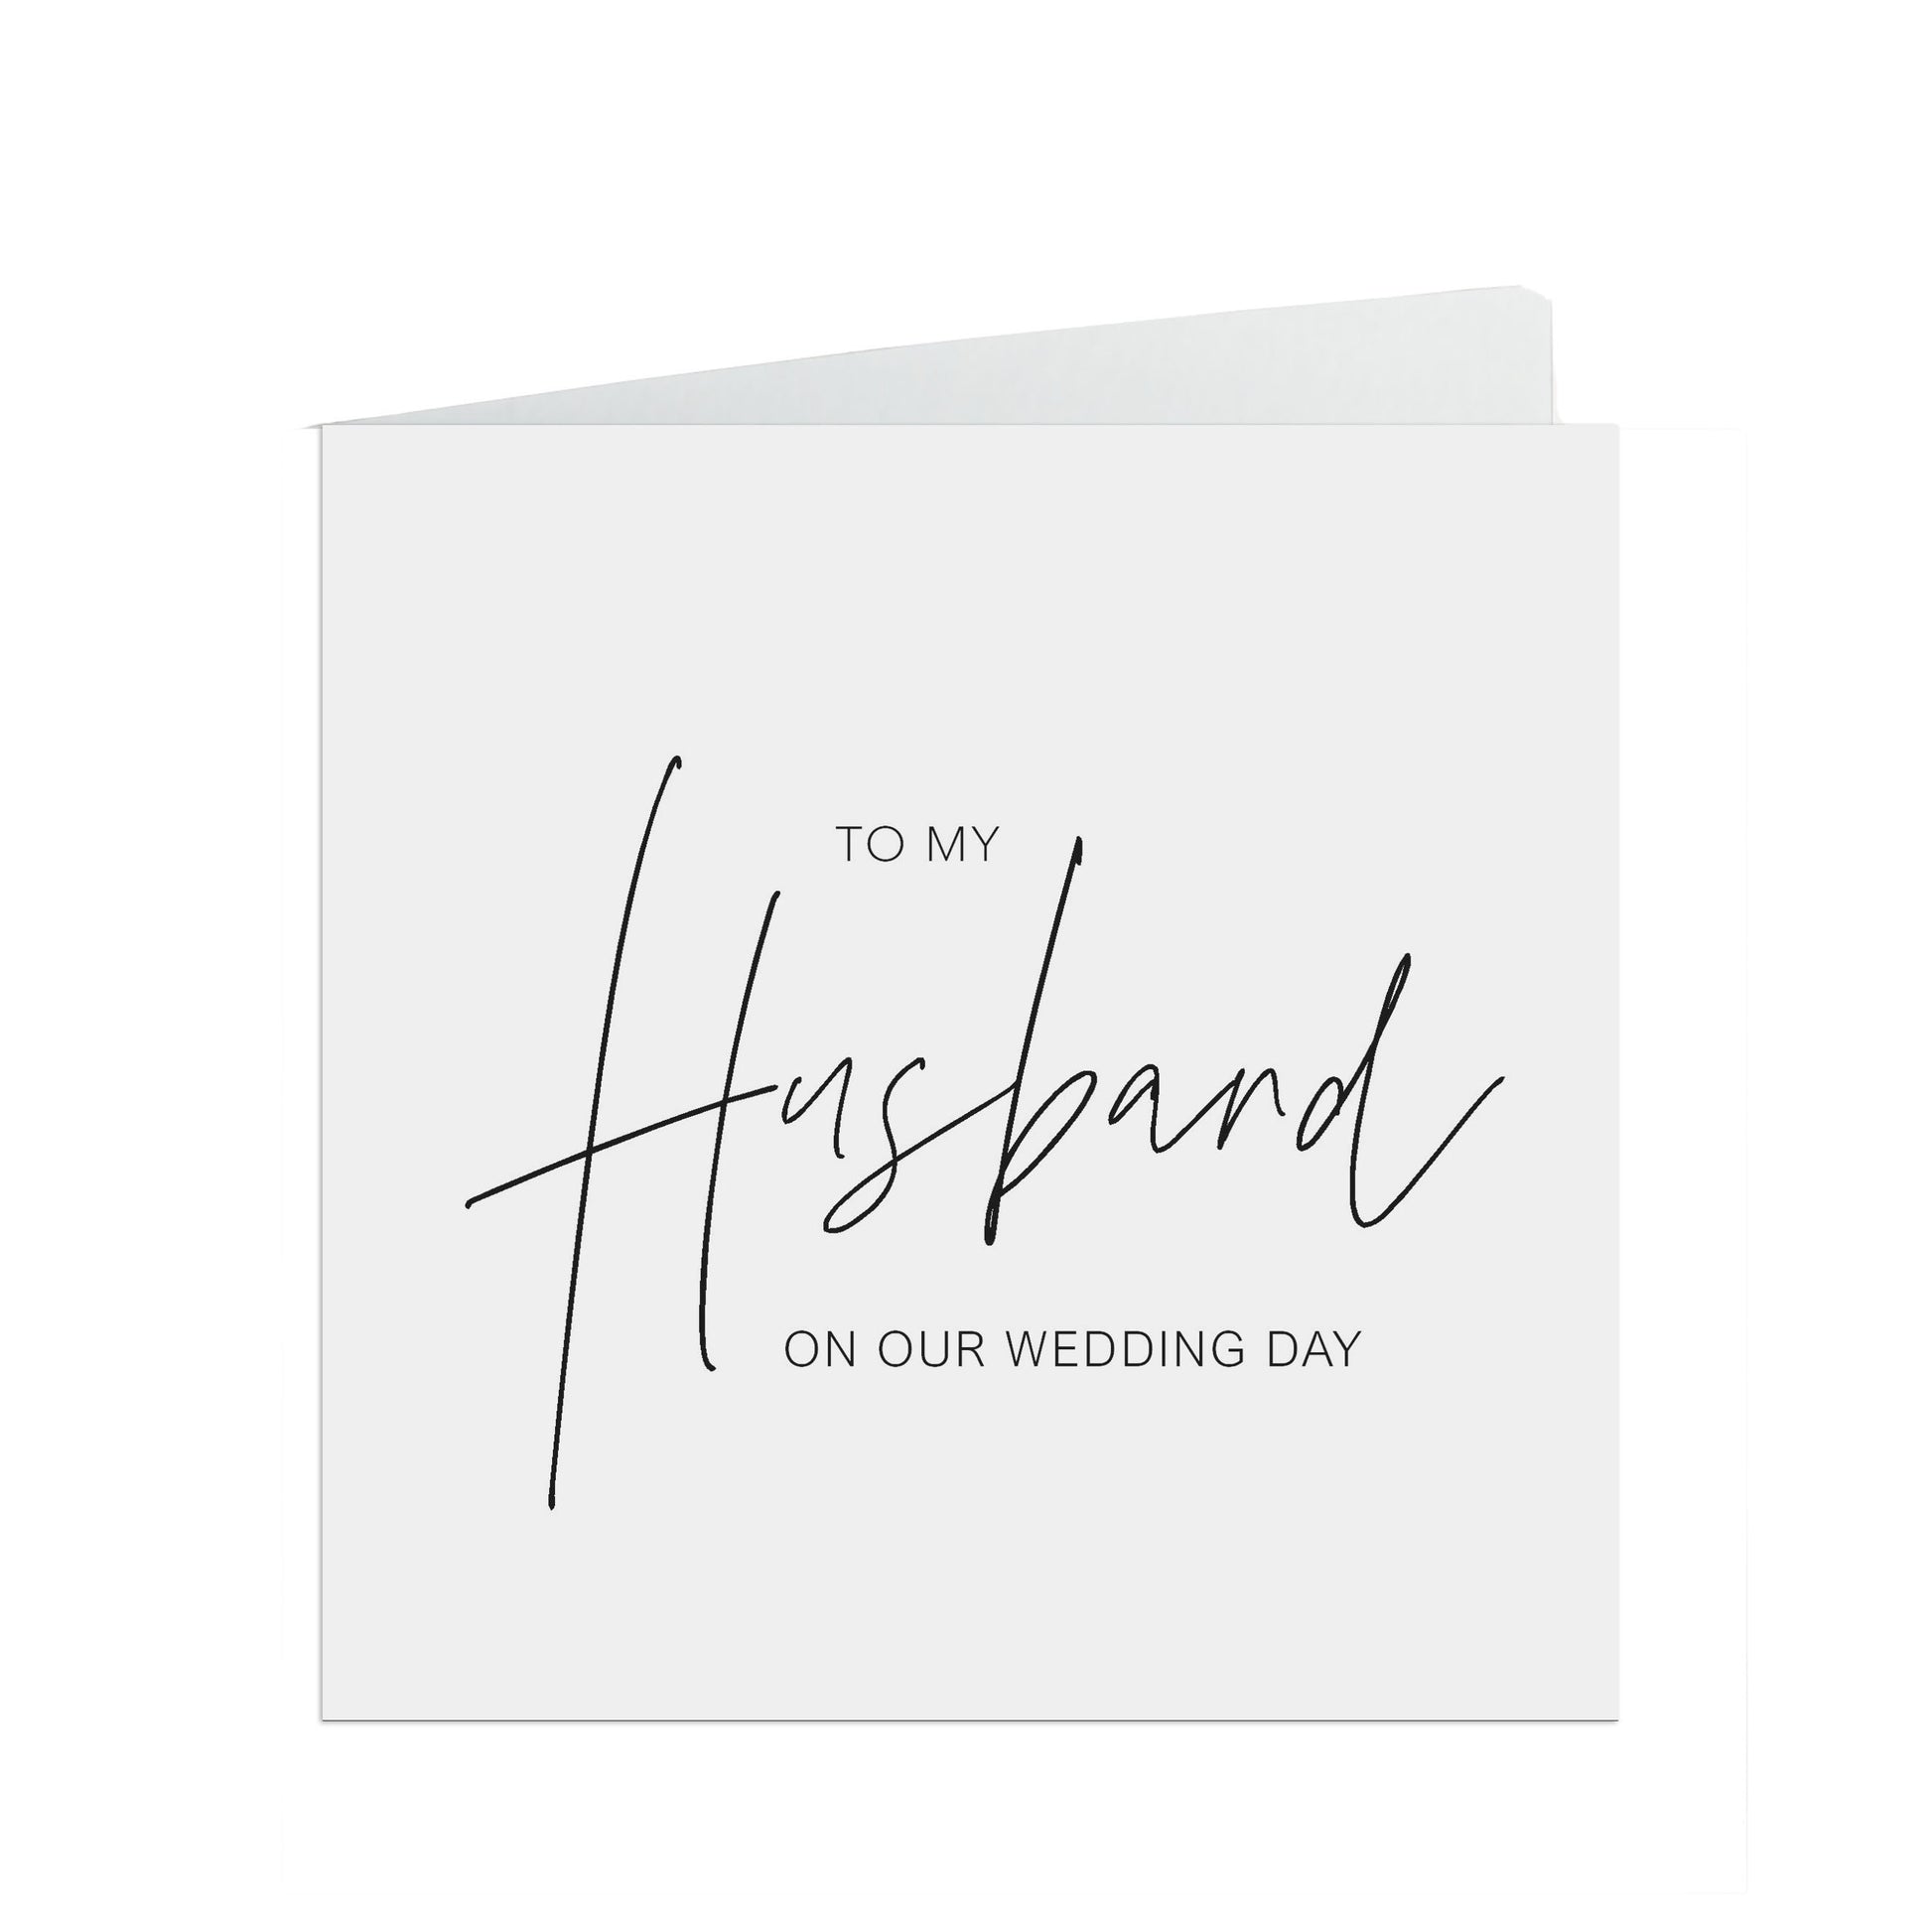 My Husband On Our Wedding Day Card, Elegant Black & White Design, 6x6 Inches In Size With A White Envelope.